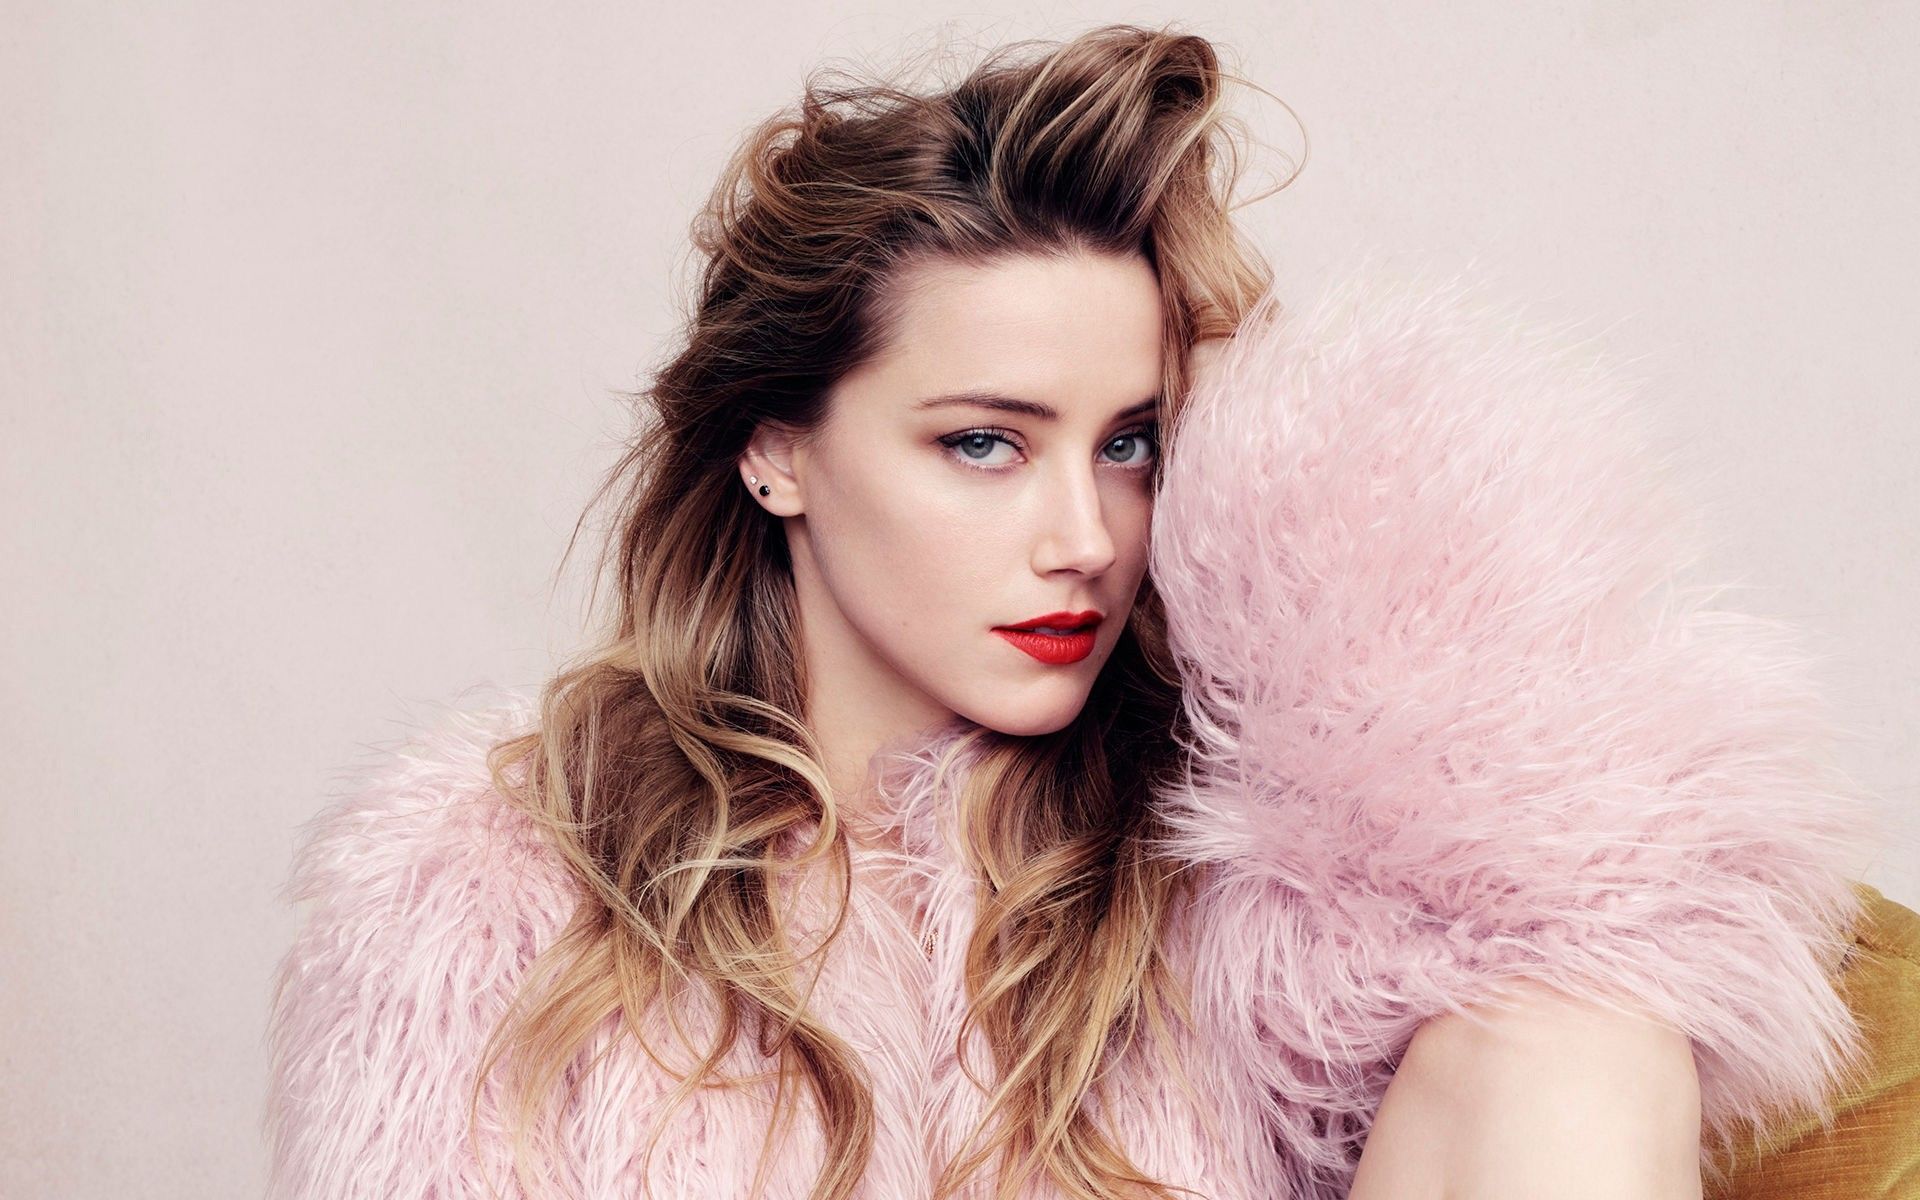 Amber Heard Background HD Image Style24x7 Awesome